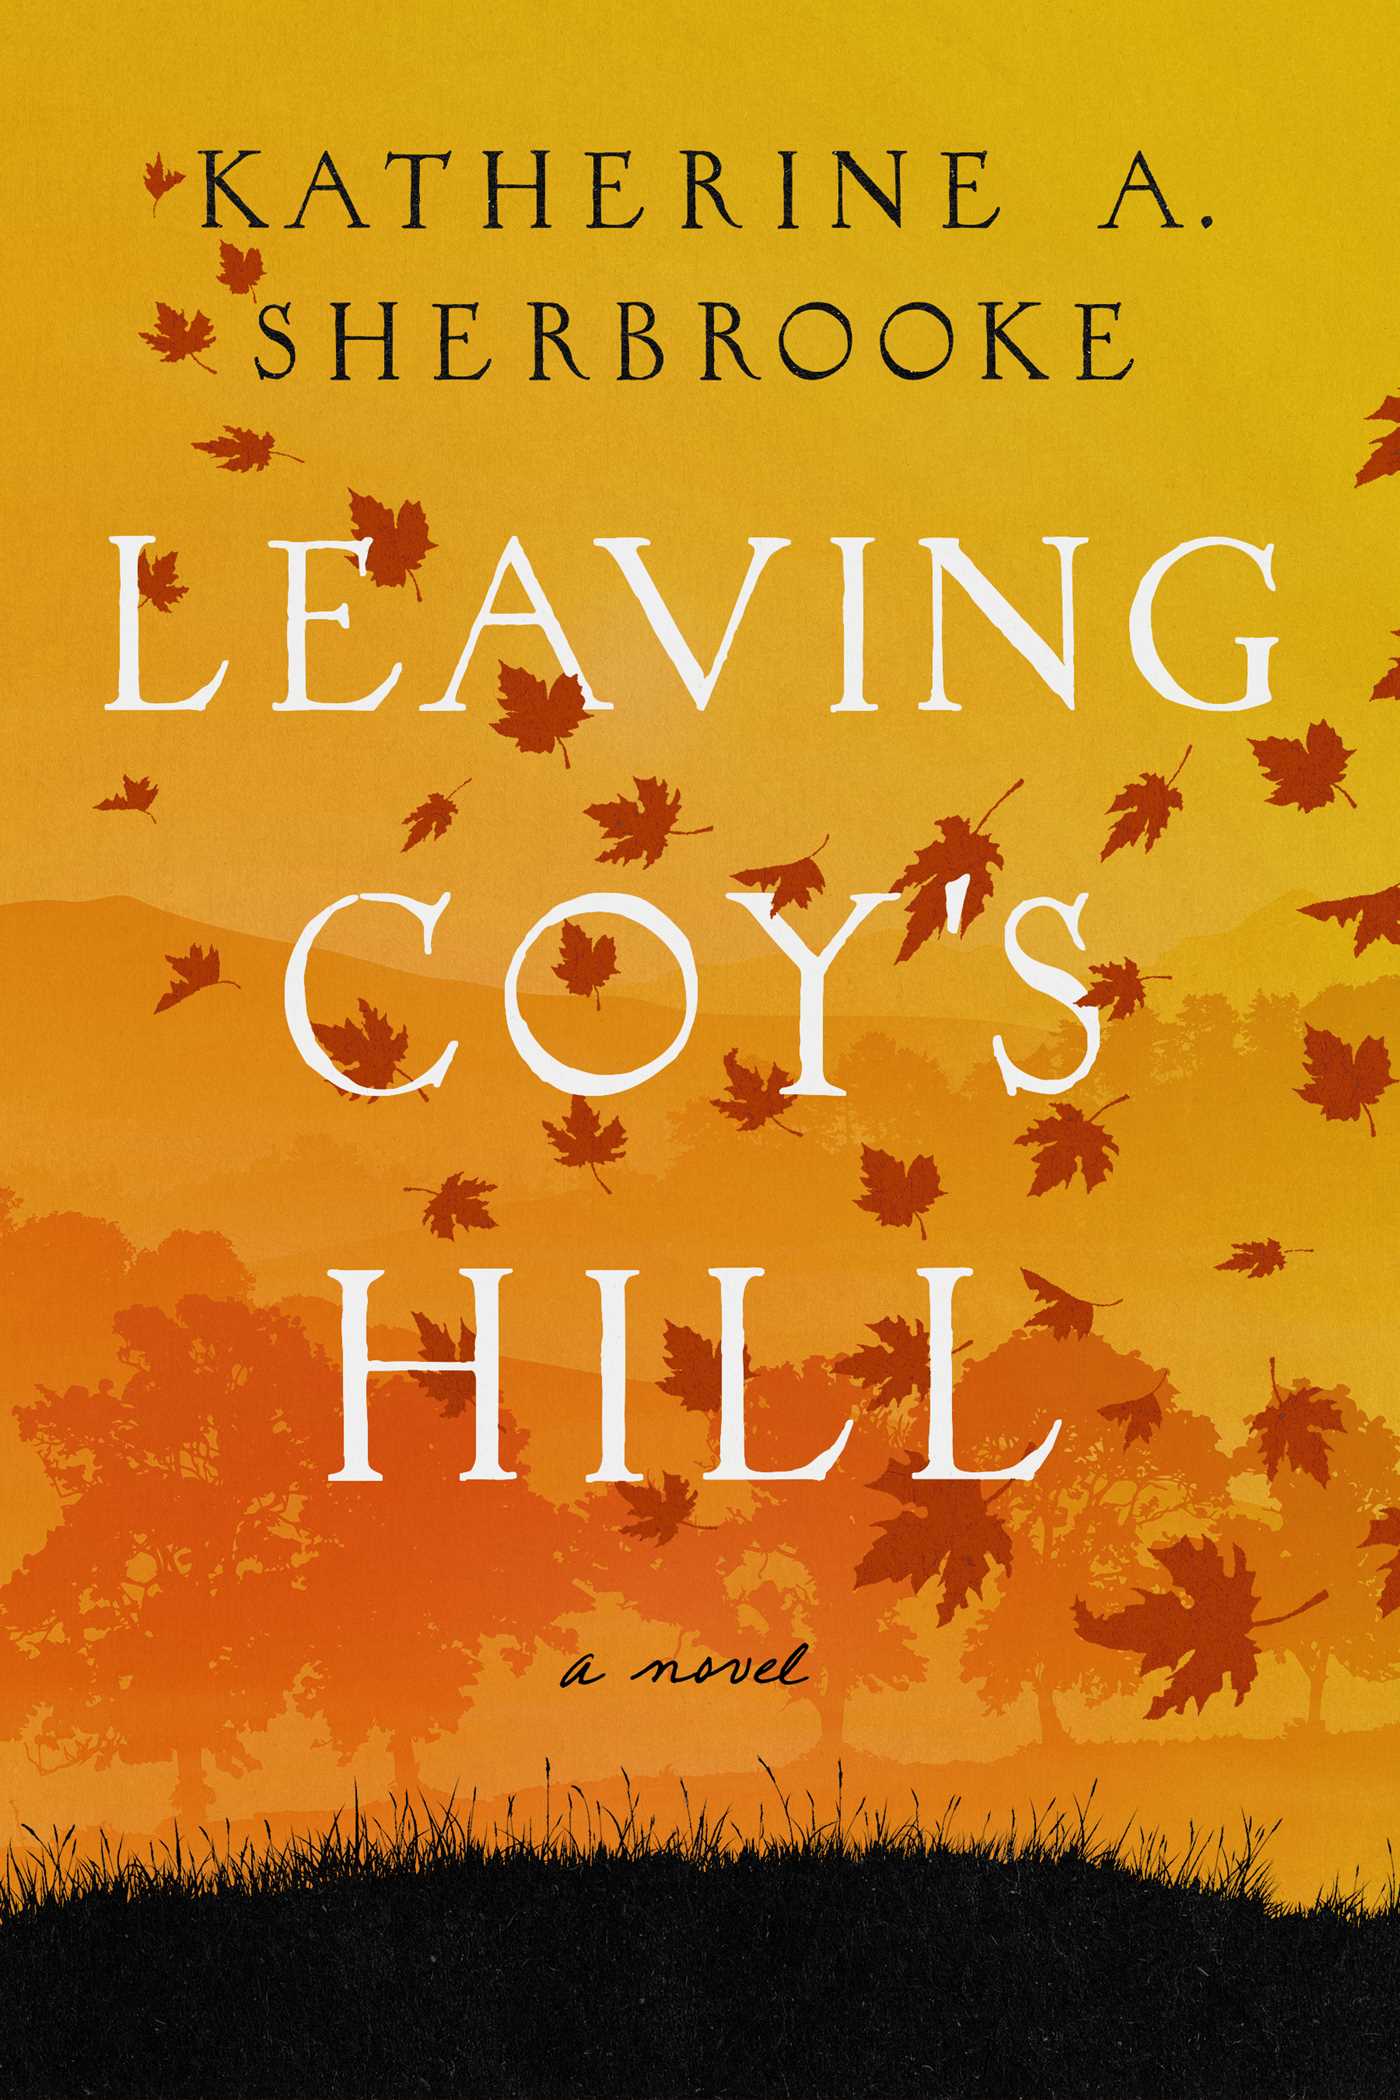 Katherine Sherbrooke “Leaving Coy’s Hill” Book Signing Book Signing